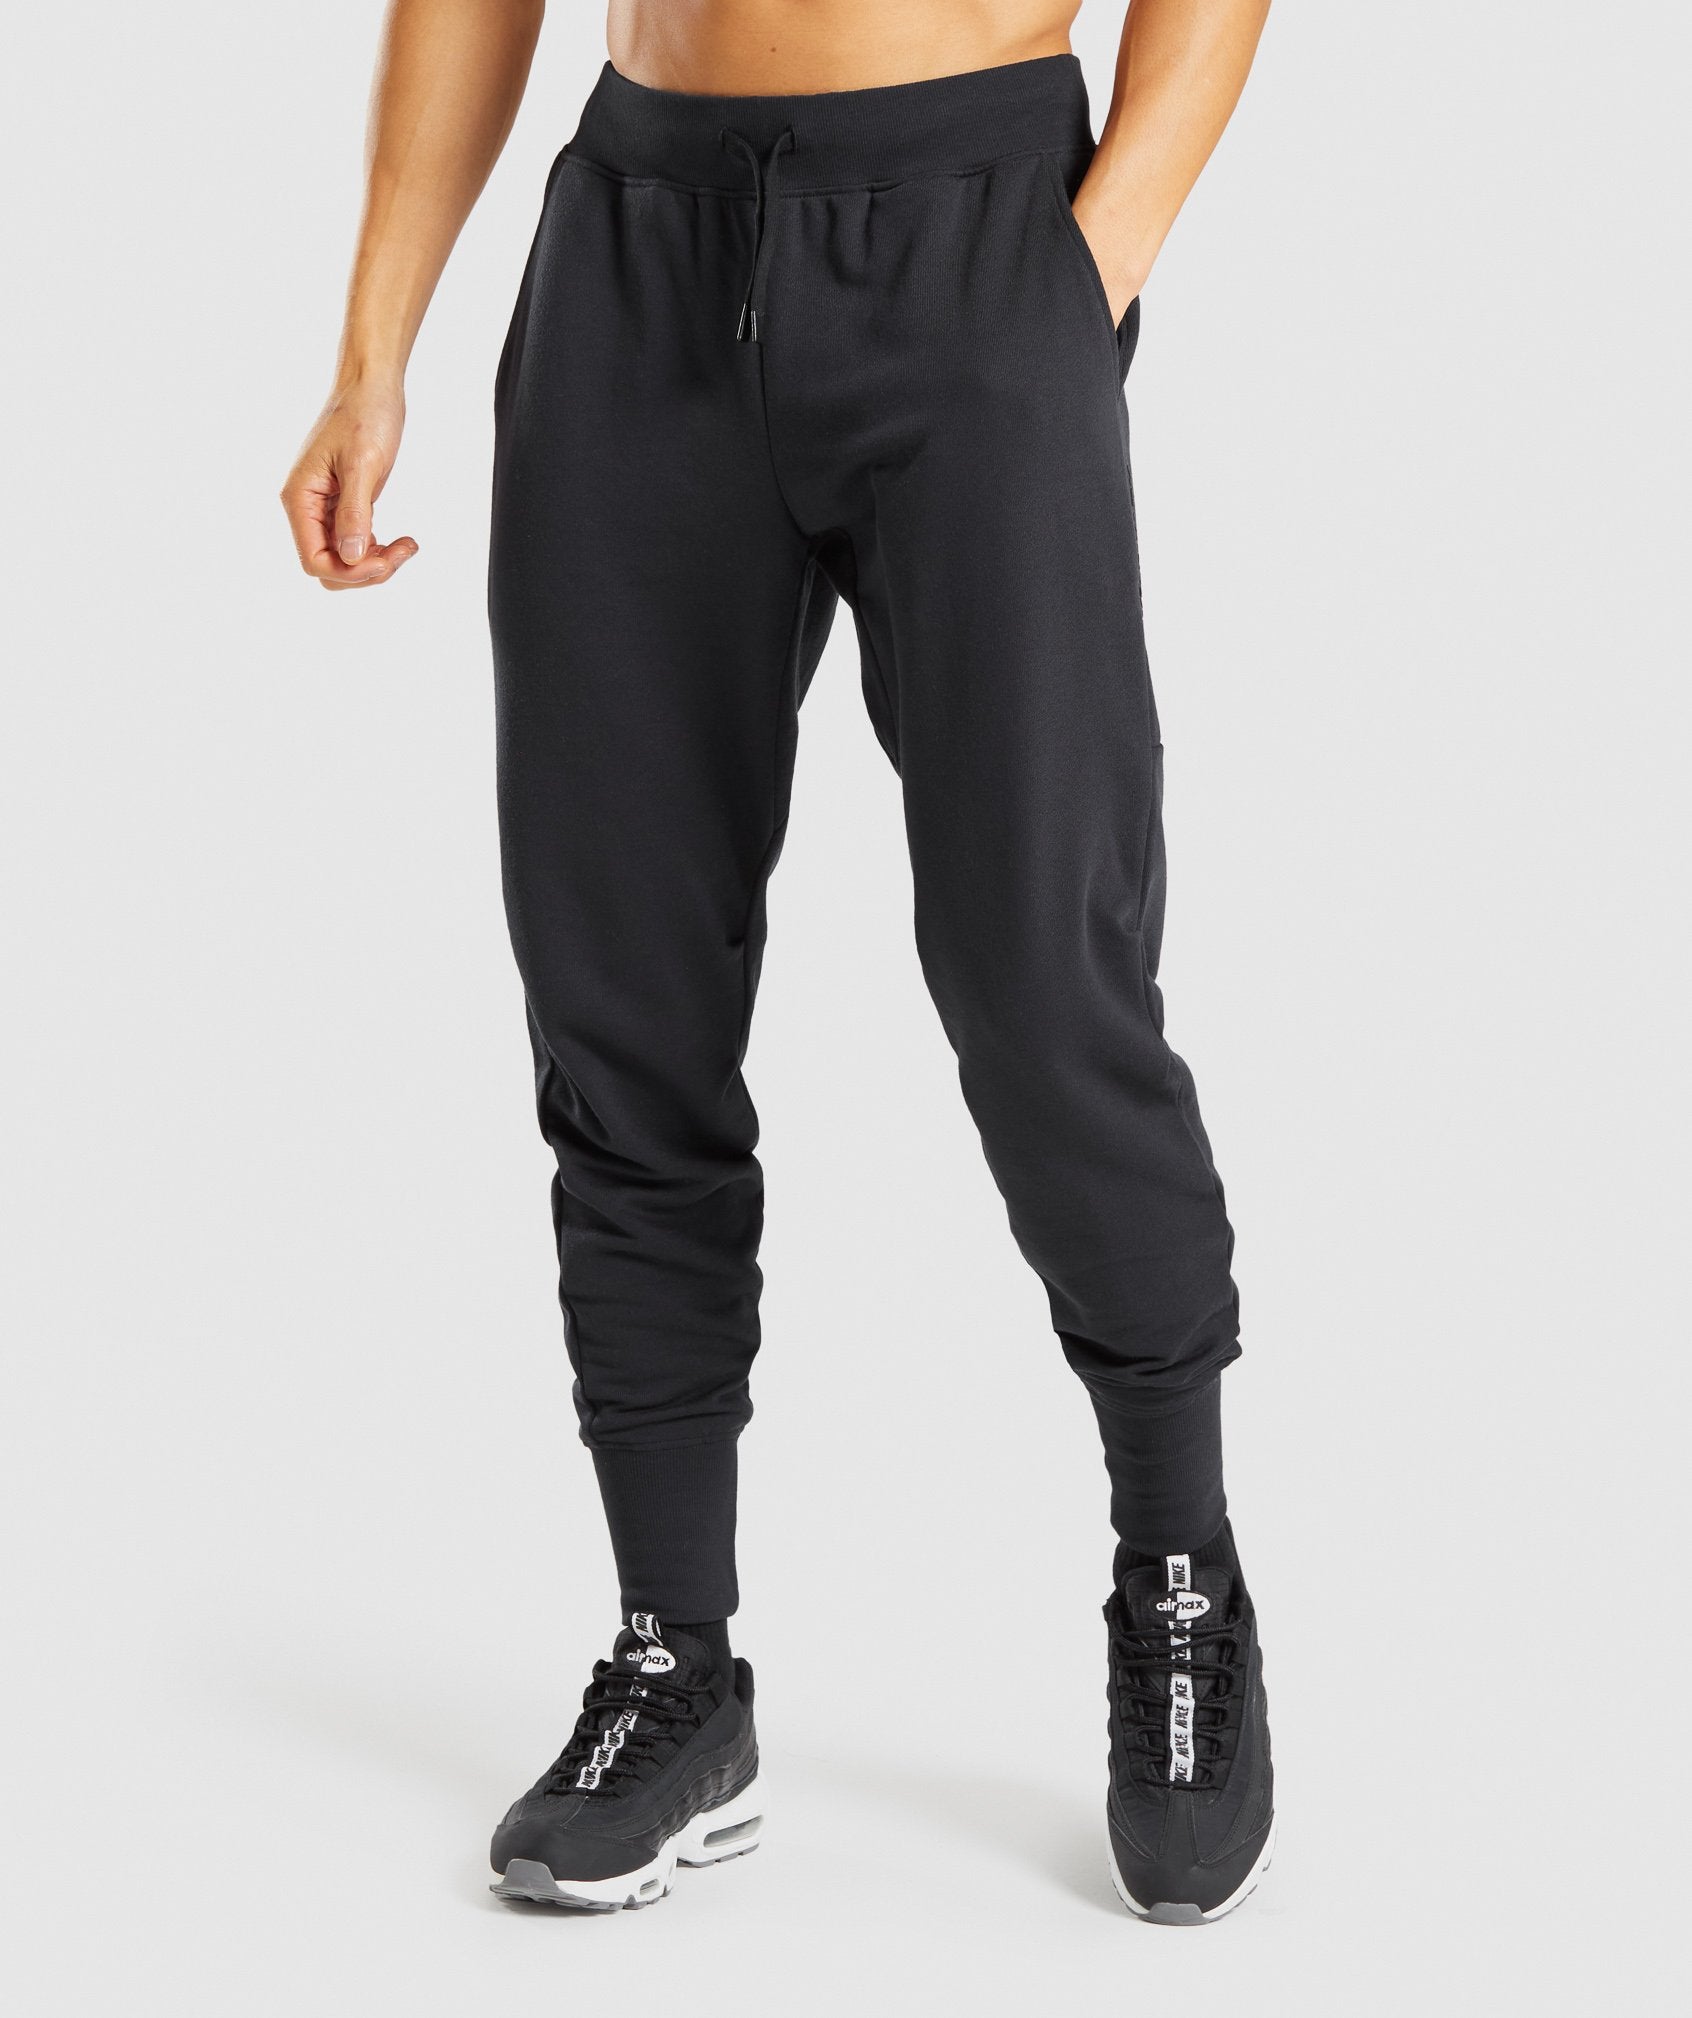 Restore Joggers in Black - view 1